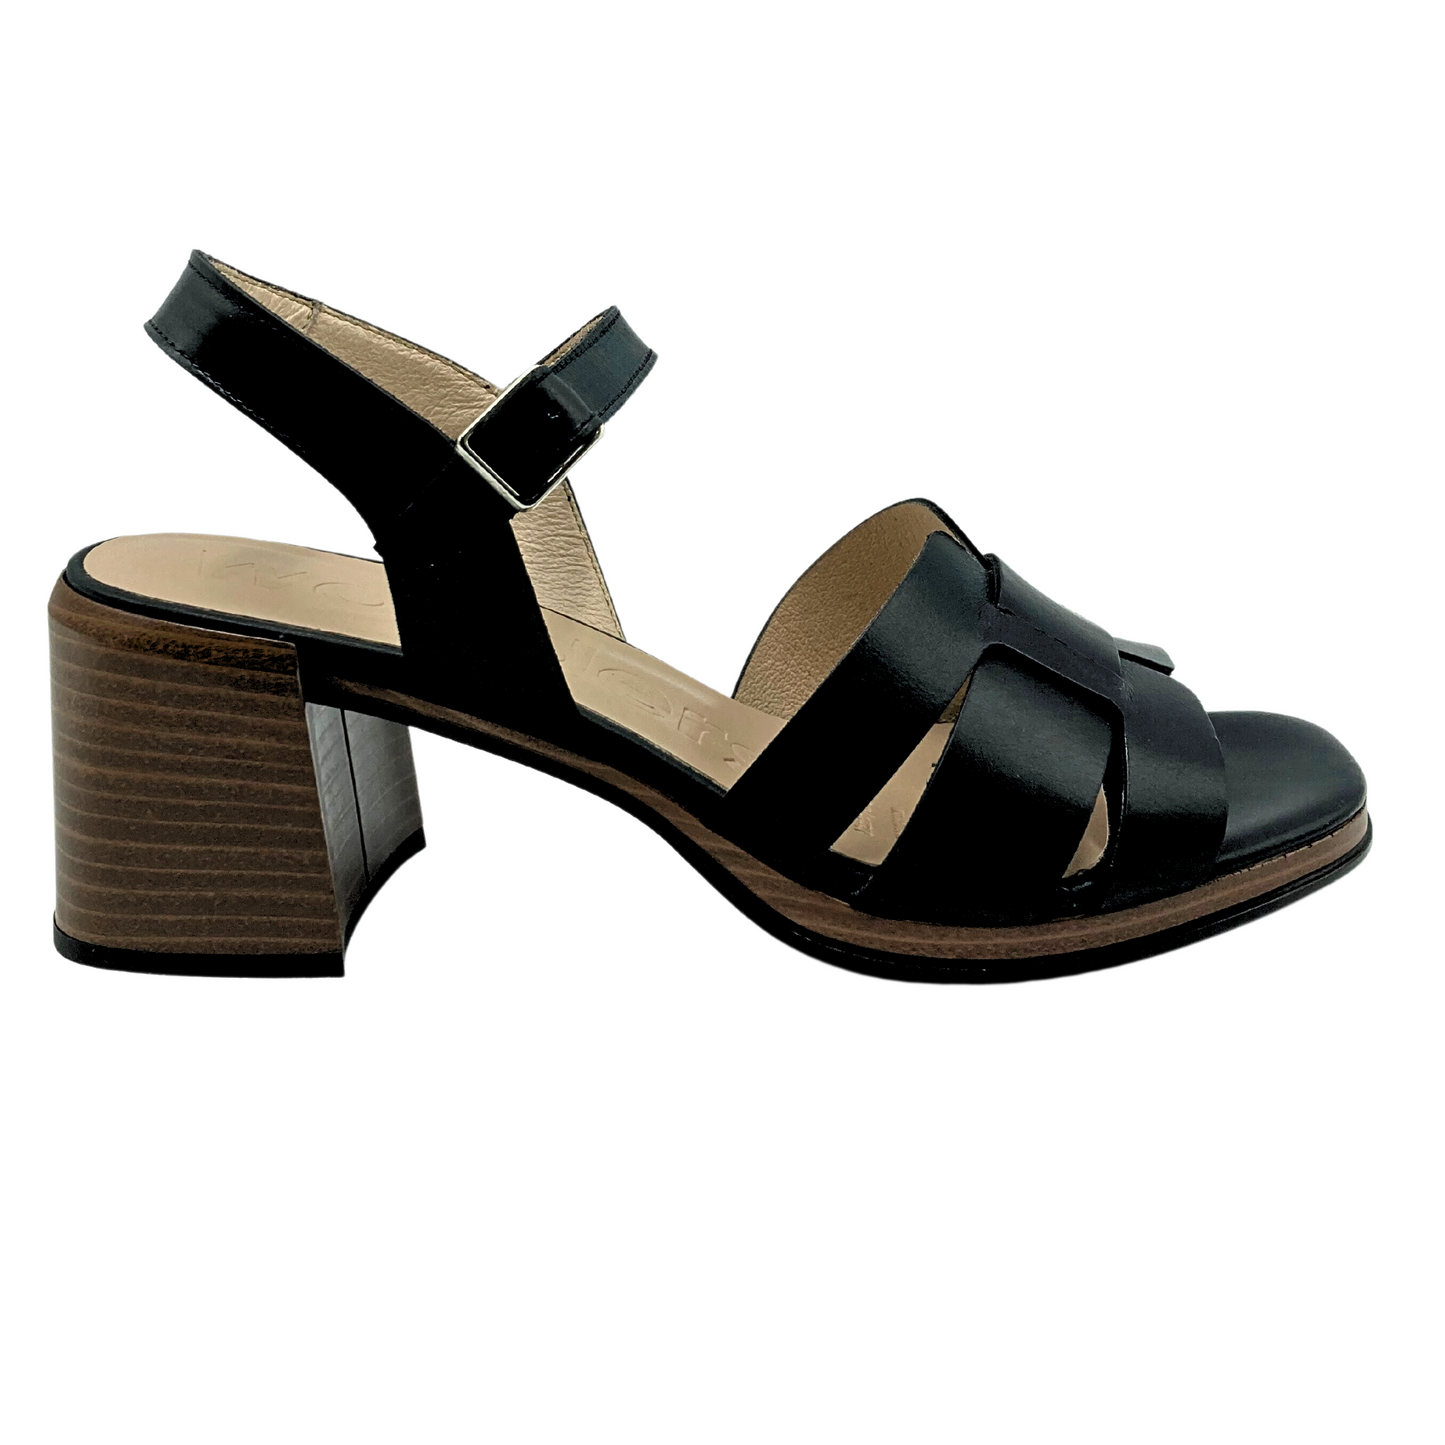 Outside view of black leatehr sandal.  Square, stacked wood heel